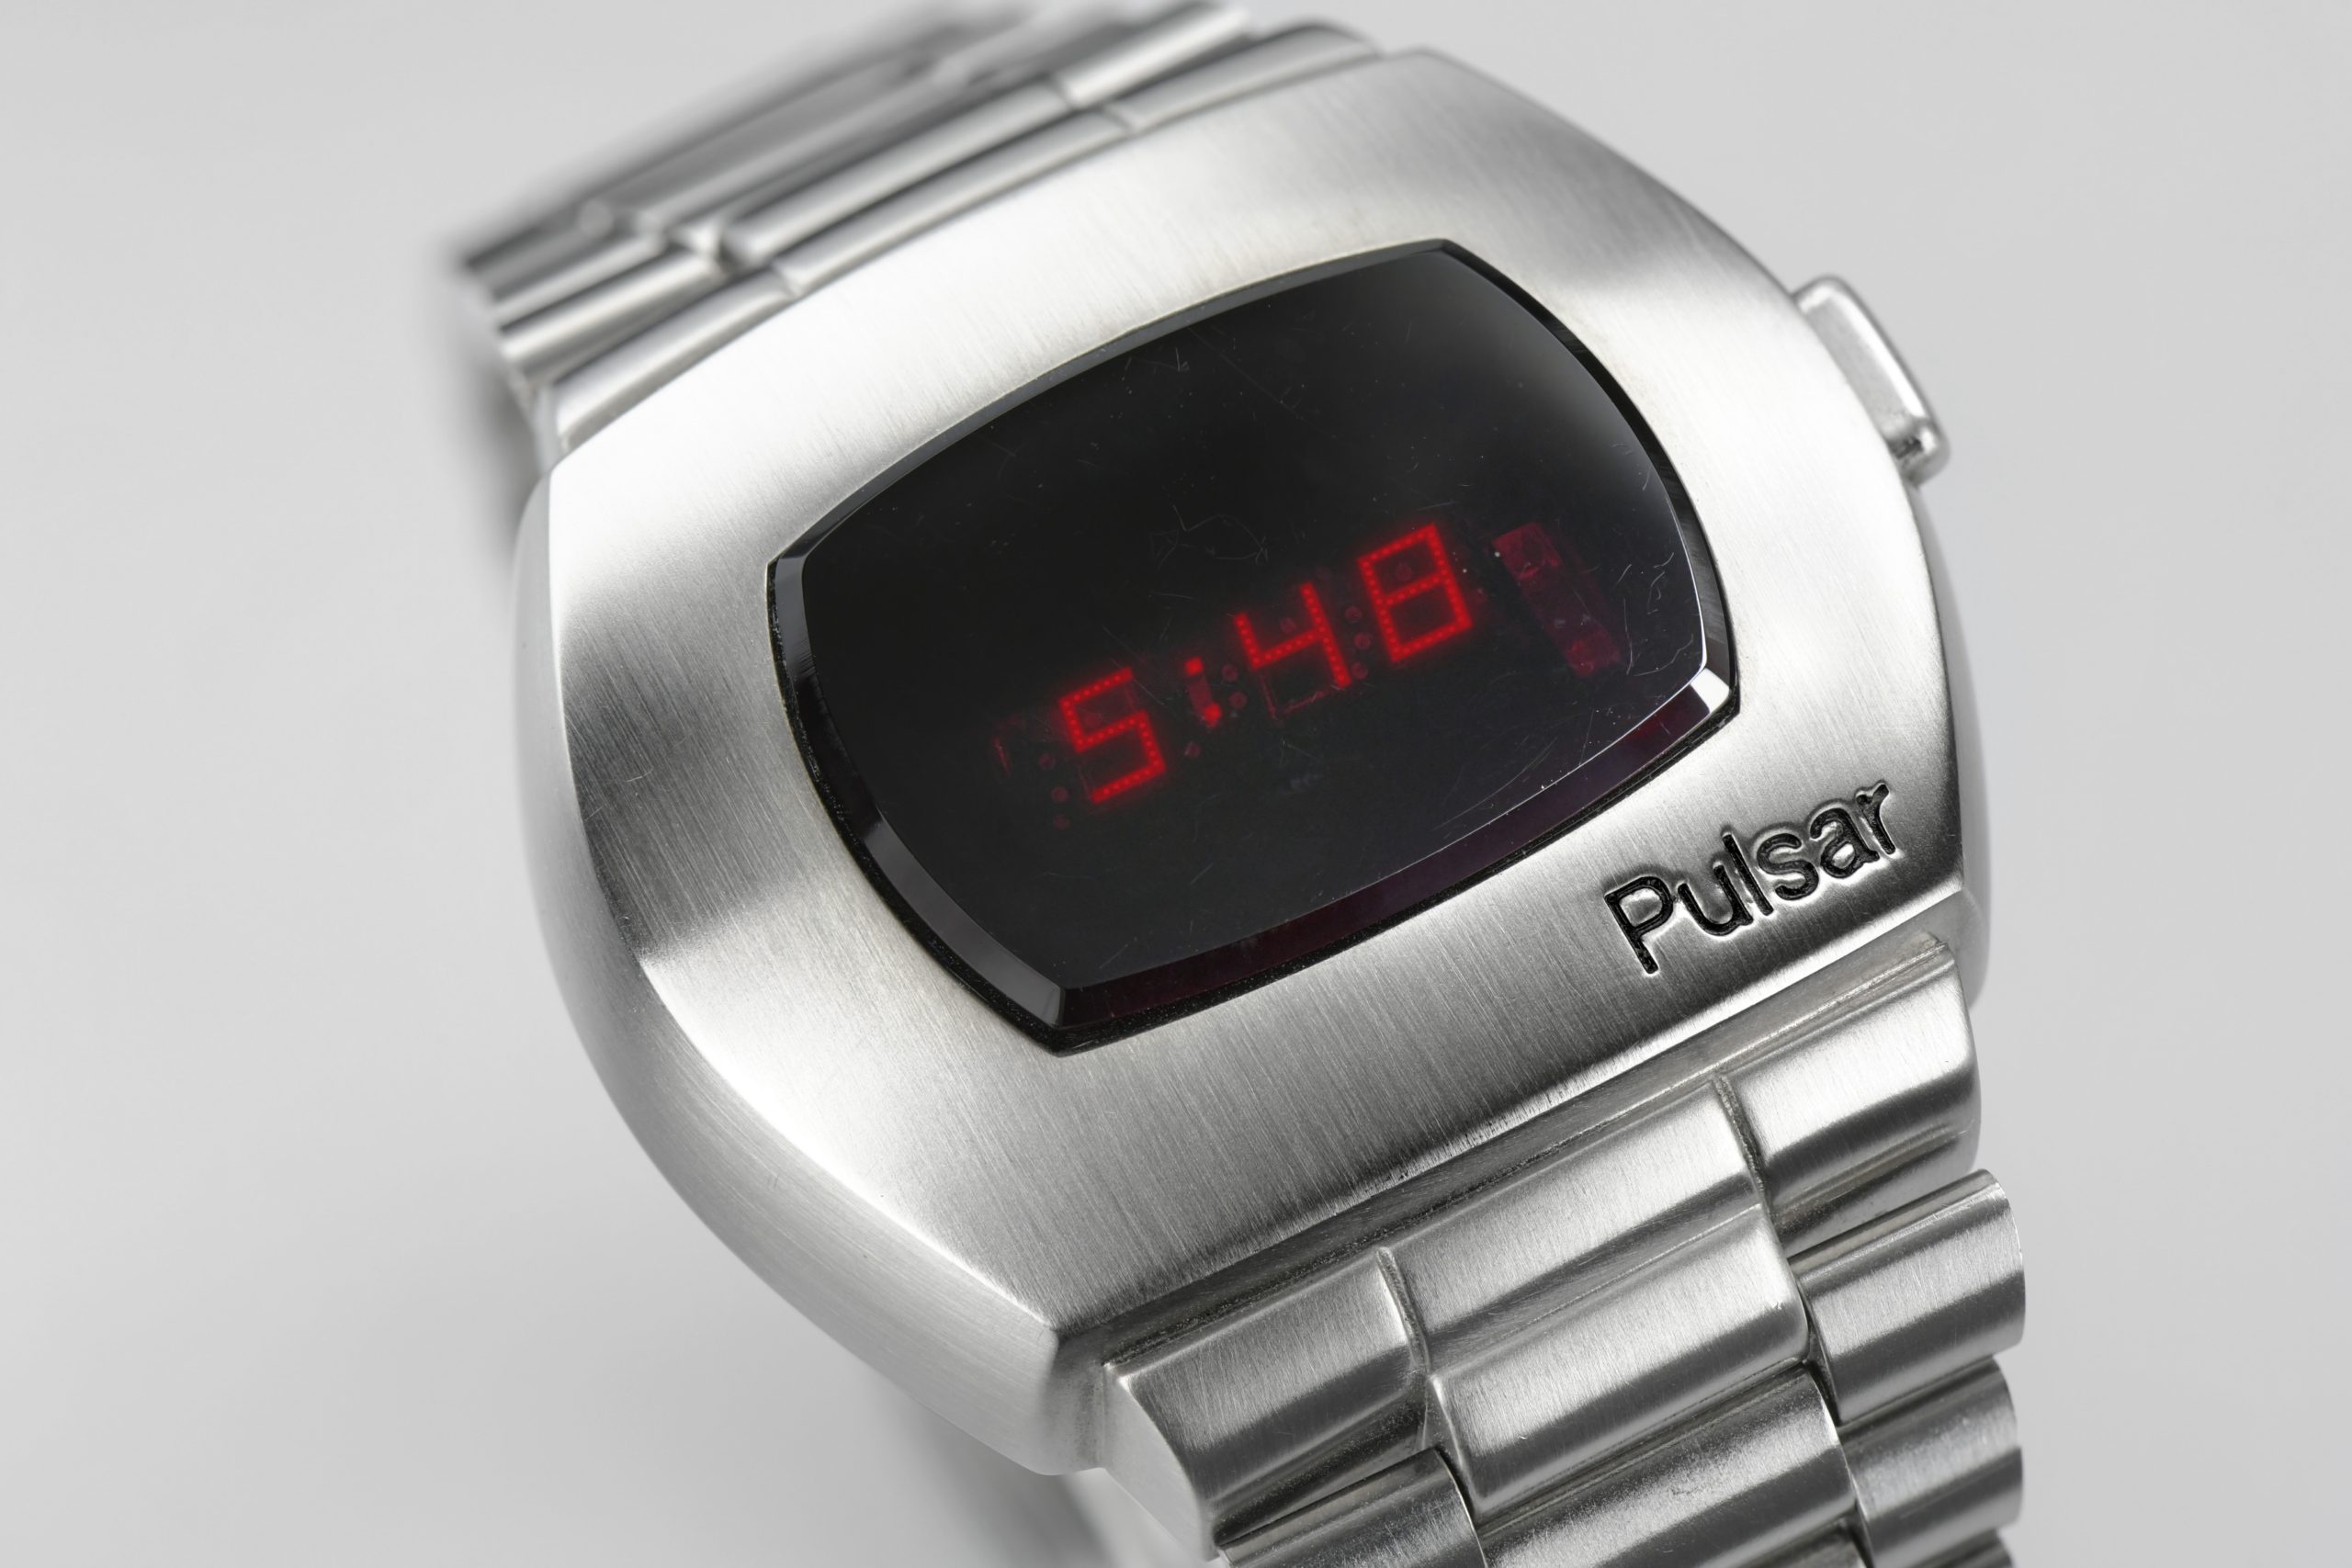 LED Watches a brief history